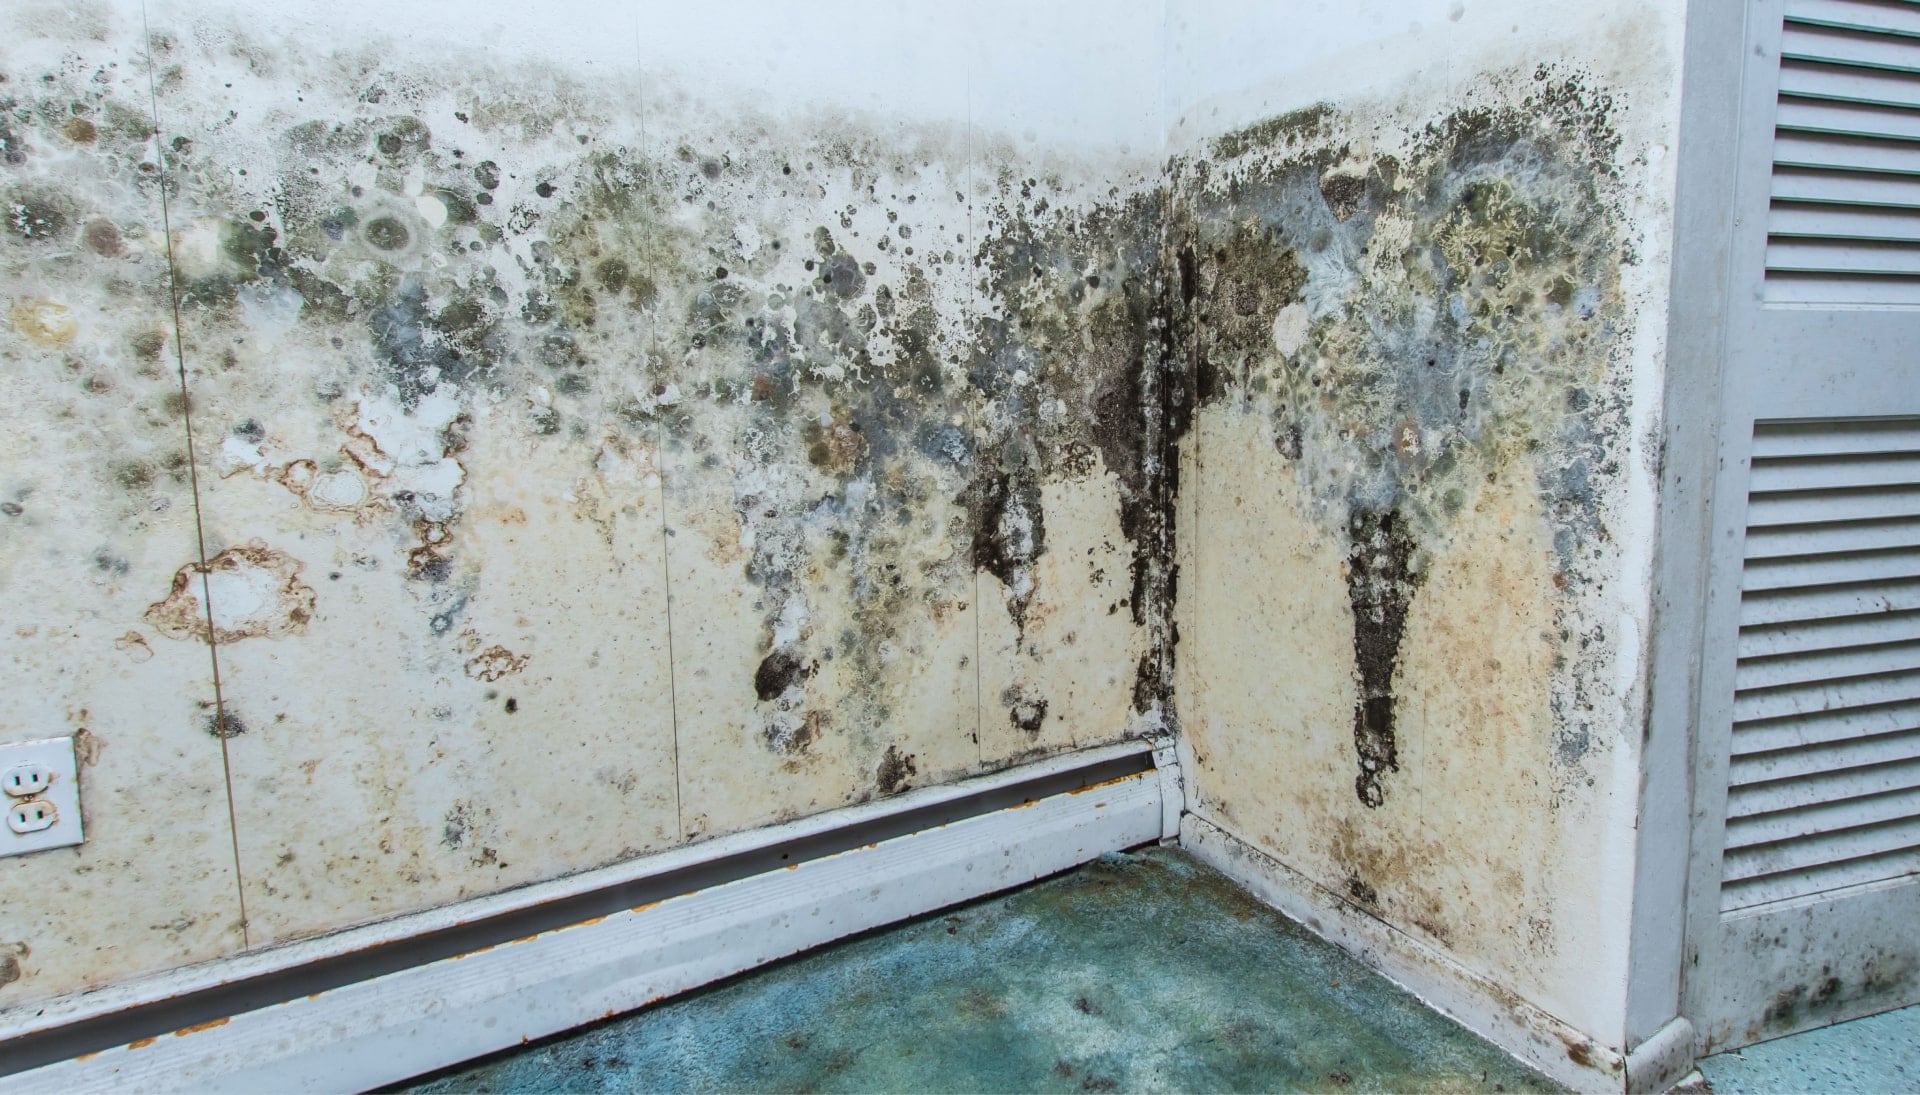 Mold Damager Odor Control Services in Lincoln